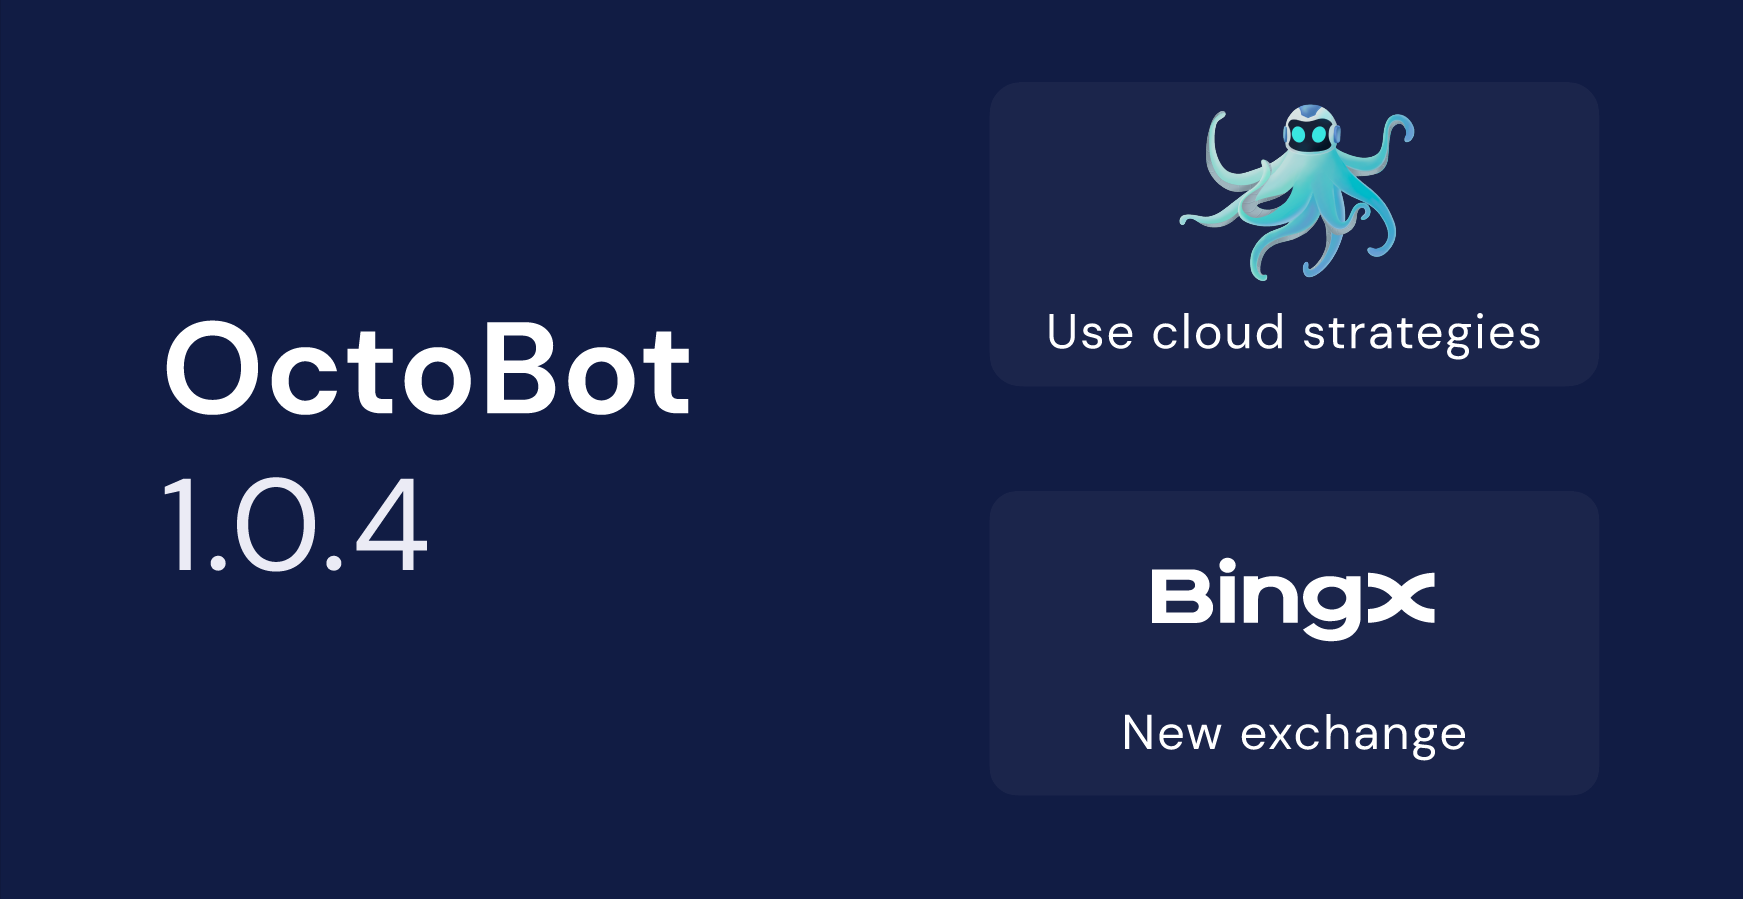 use octobot cloud strategies and trade on bingx